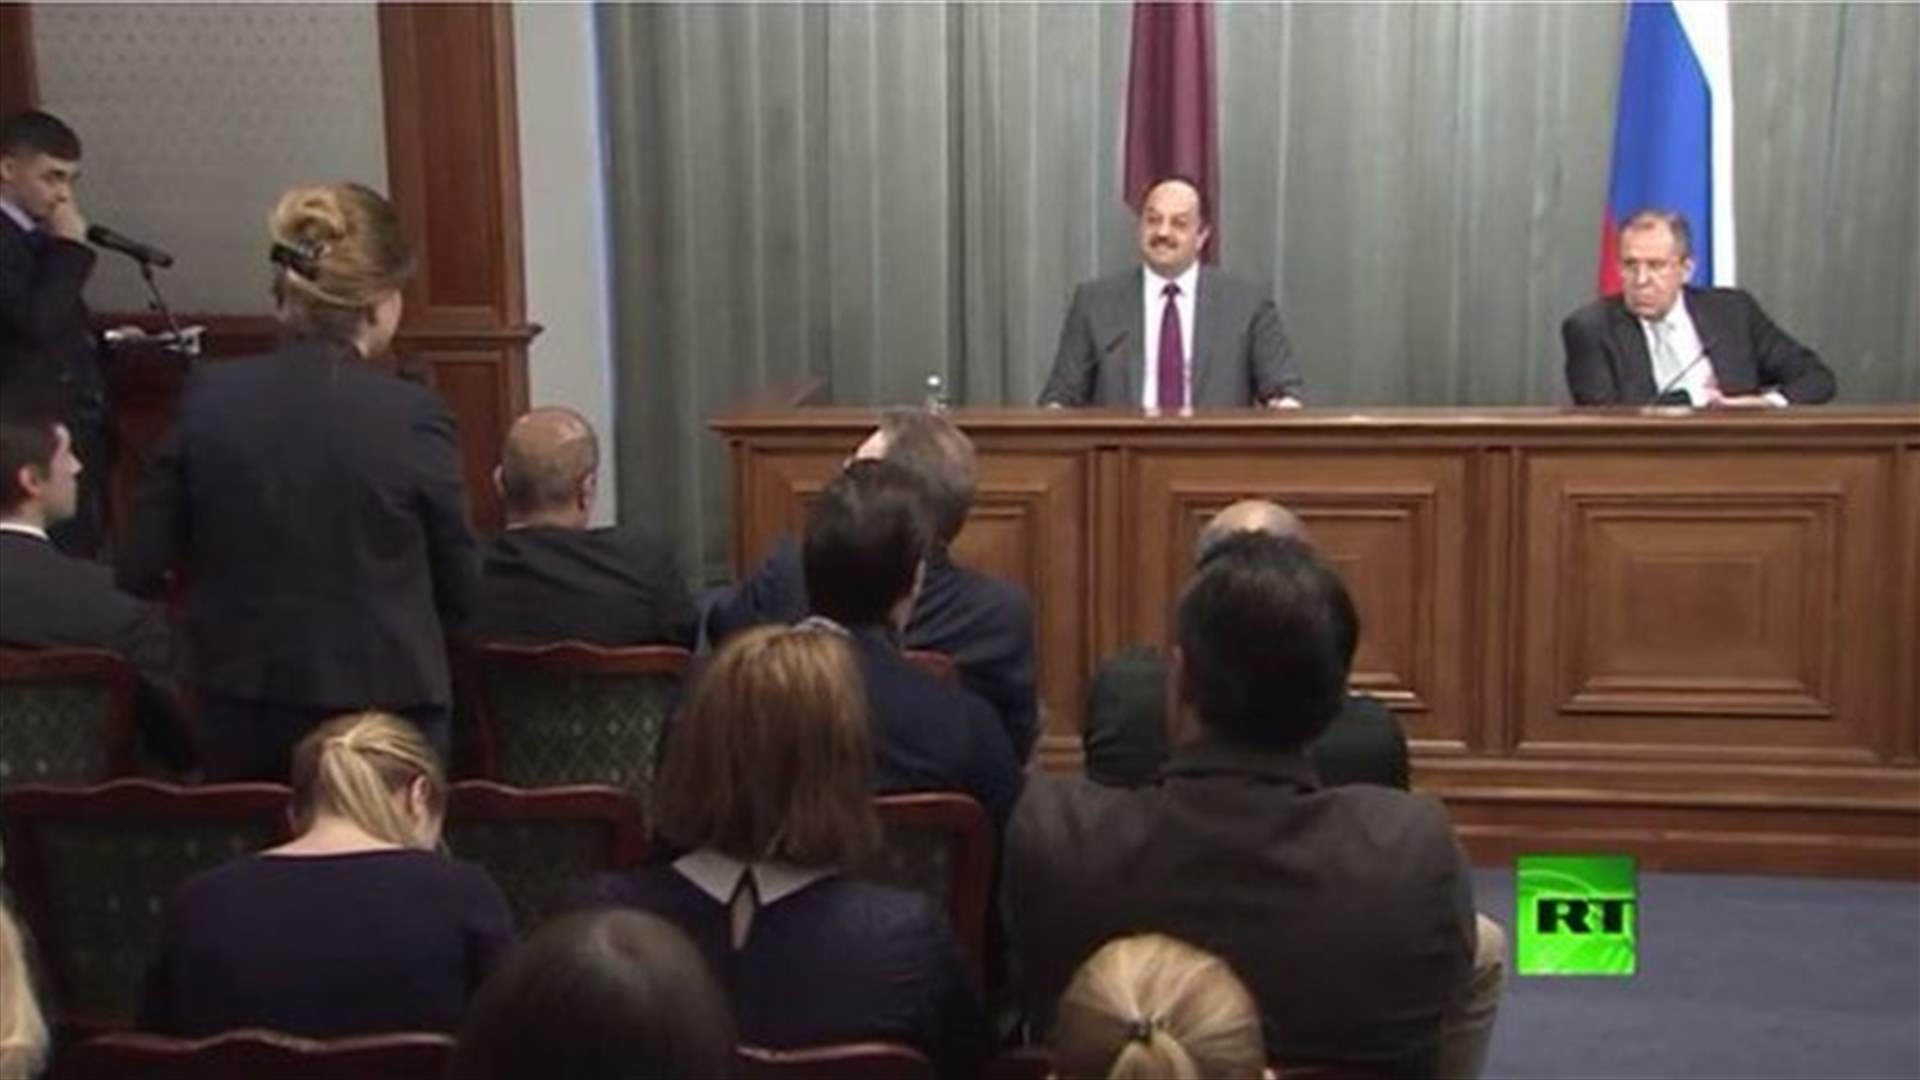 Qatar says opposes creation of opposition lists before Syria peace talks